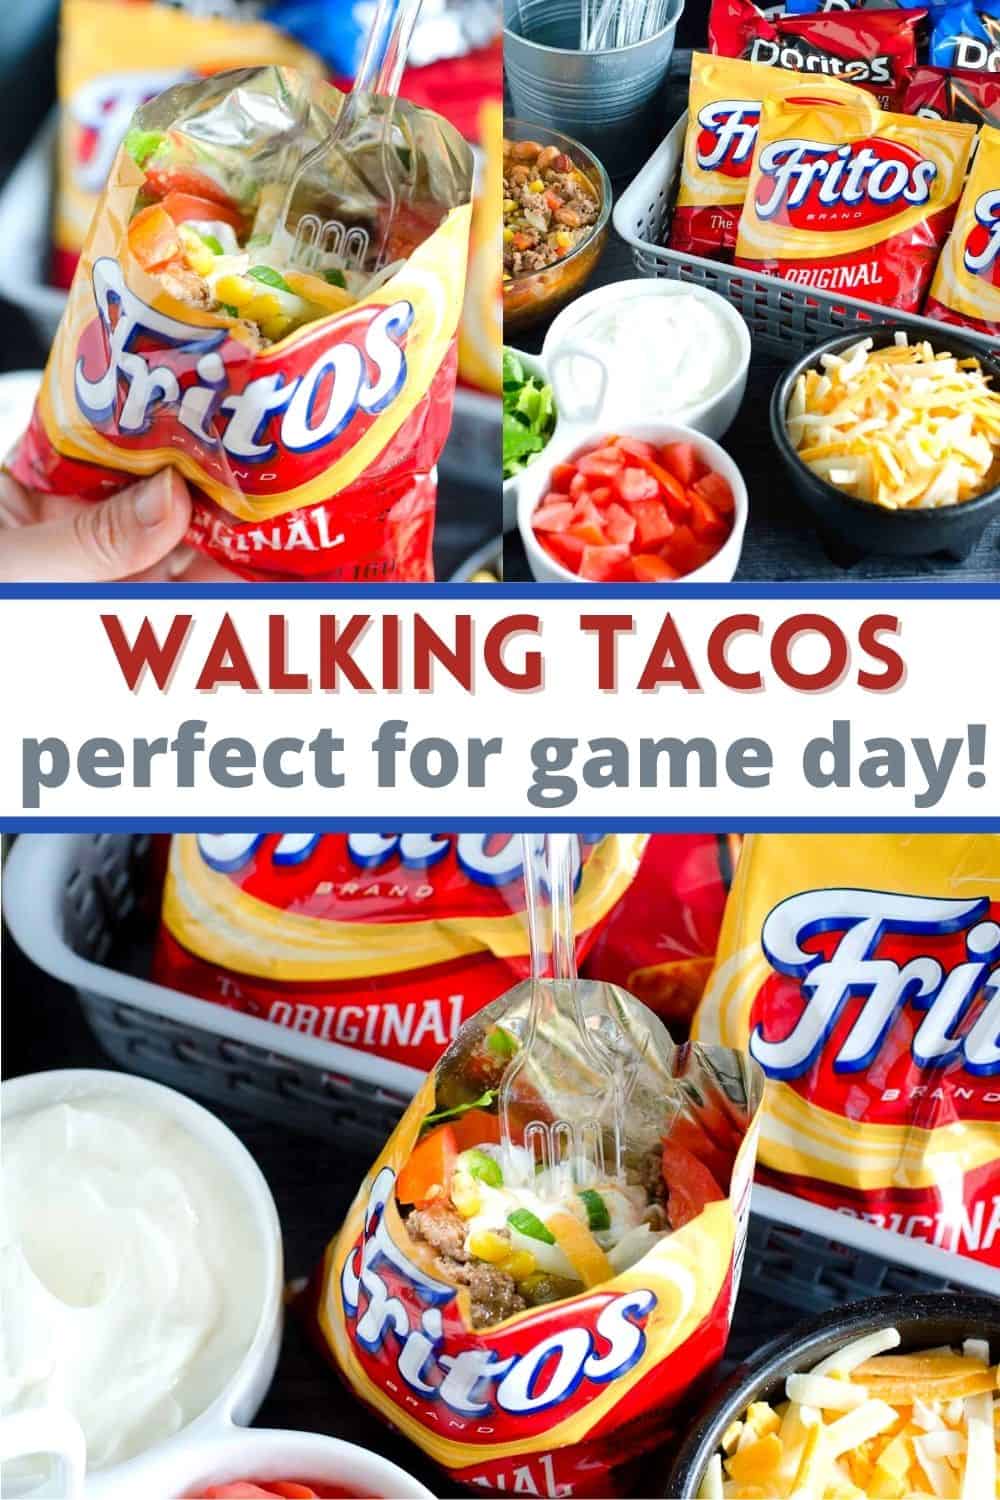 A walking taco is taco meat served in a bag of Frito or Dorito chips with your favorite taco toppings. The perfect party food!